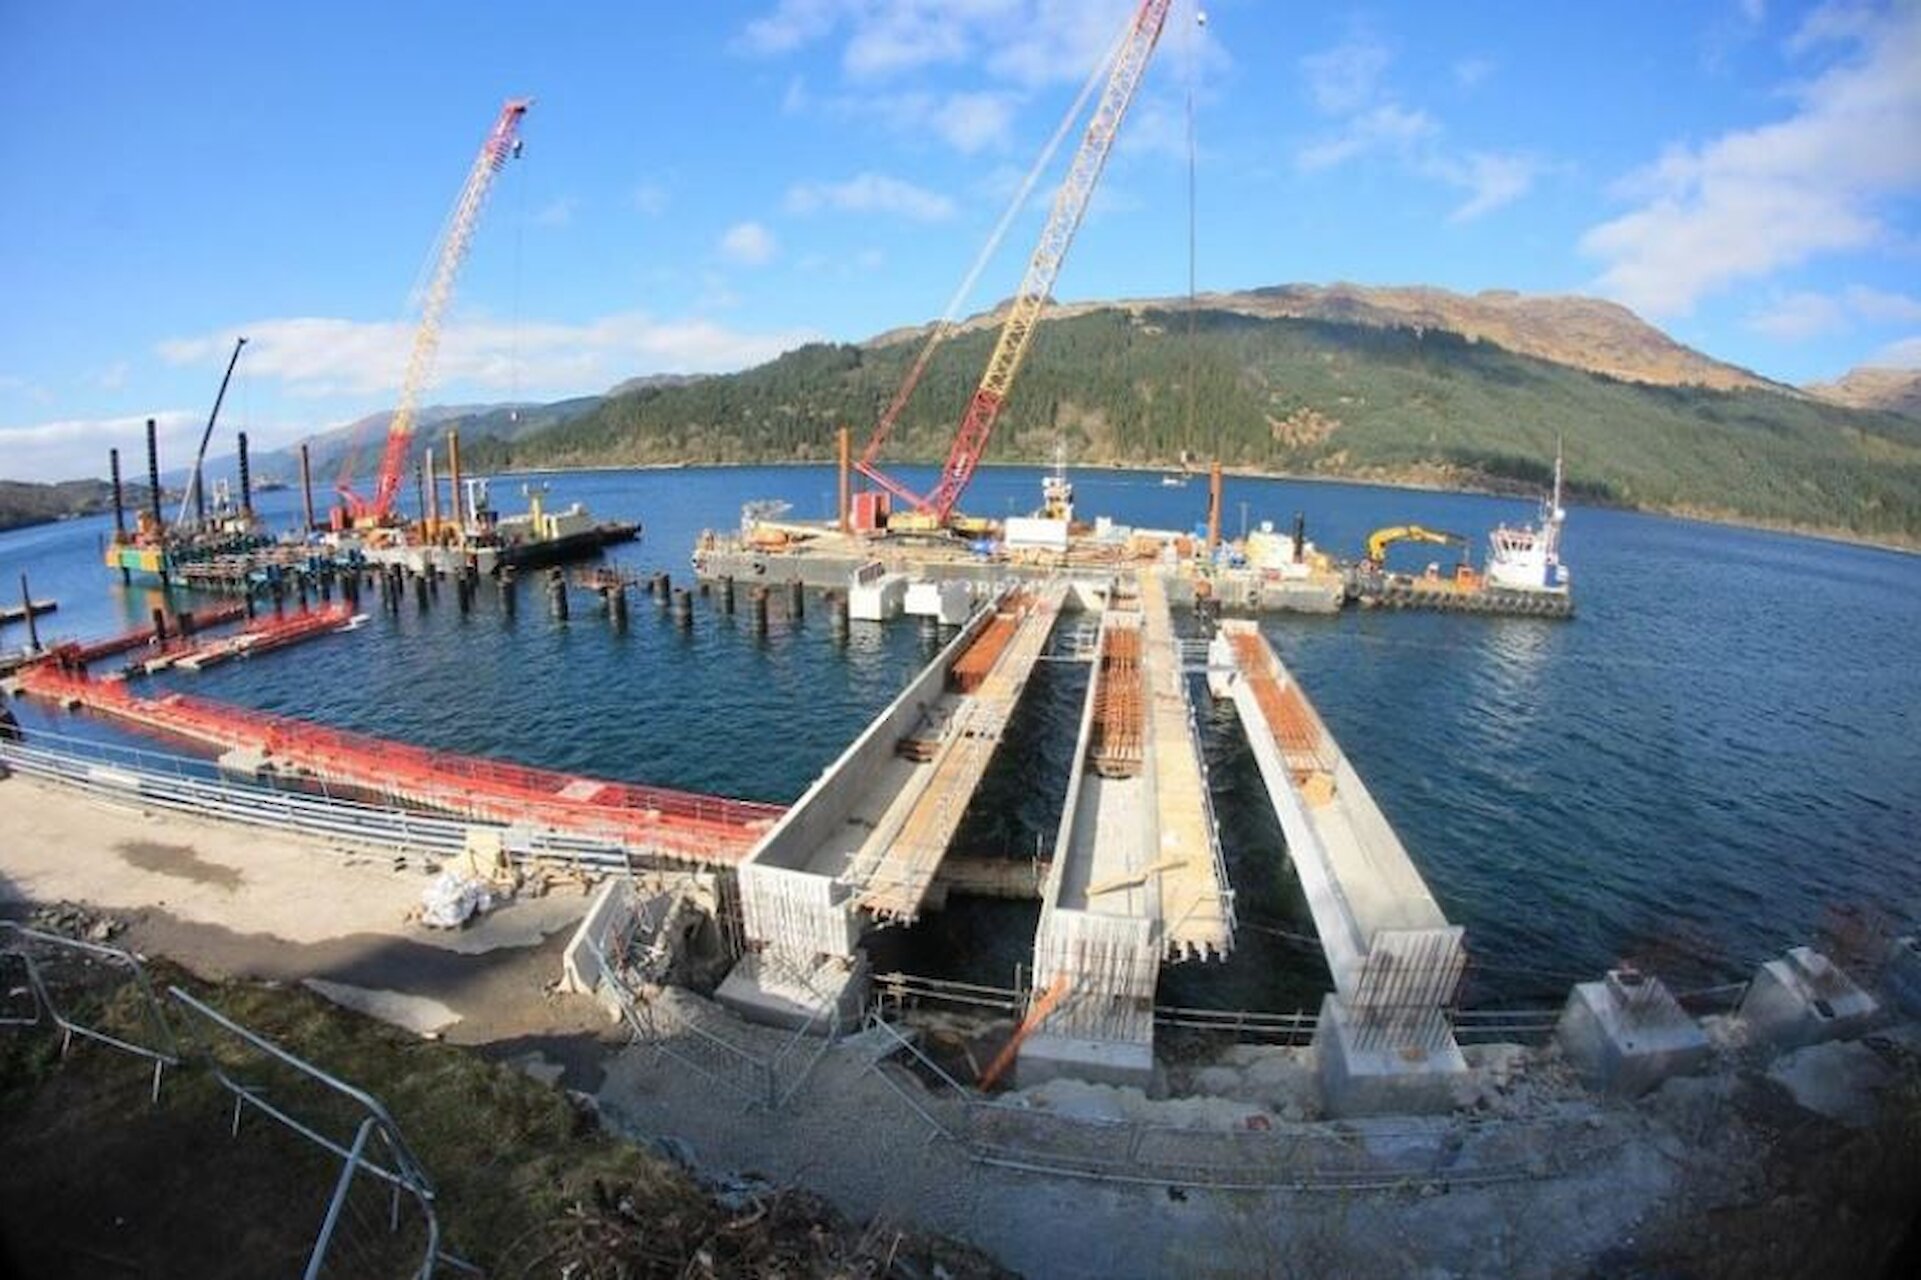 Northern return precast units placed onto tubular piles and northern bankseat pads